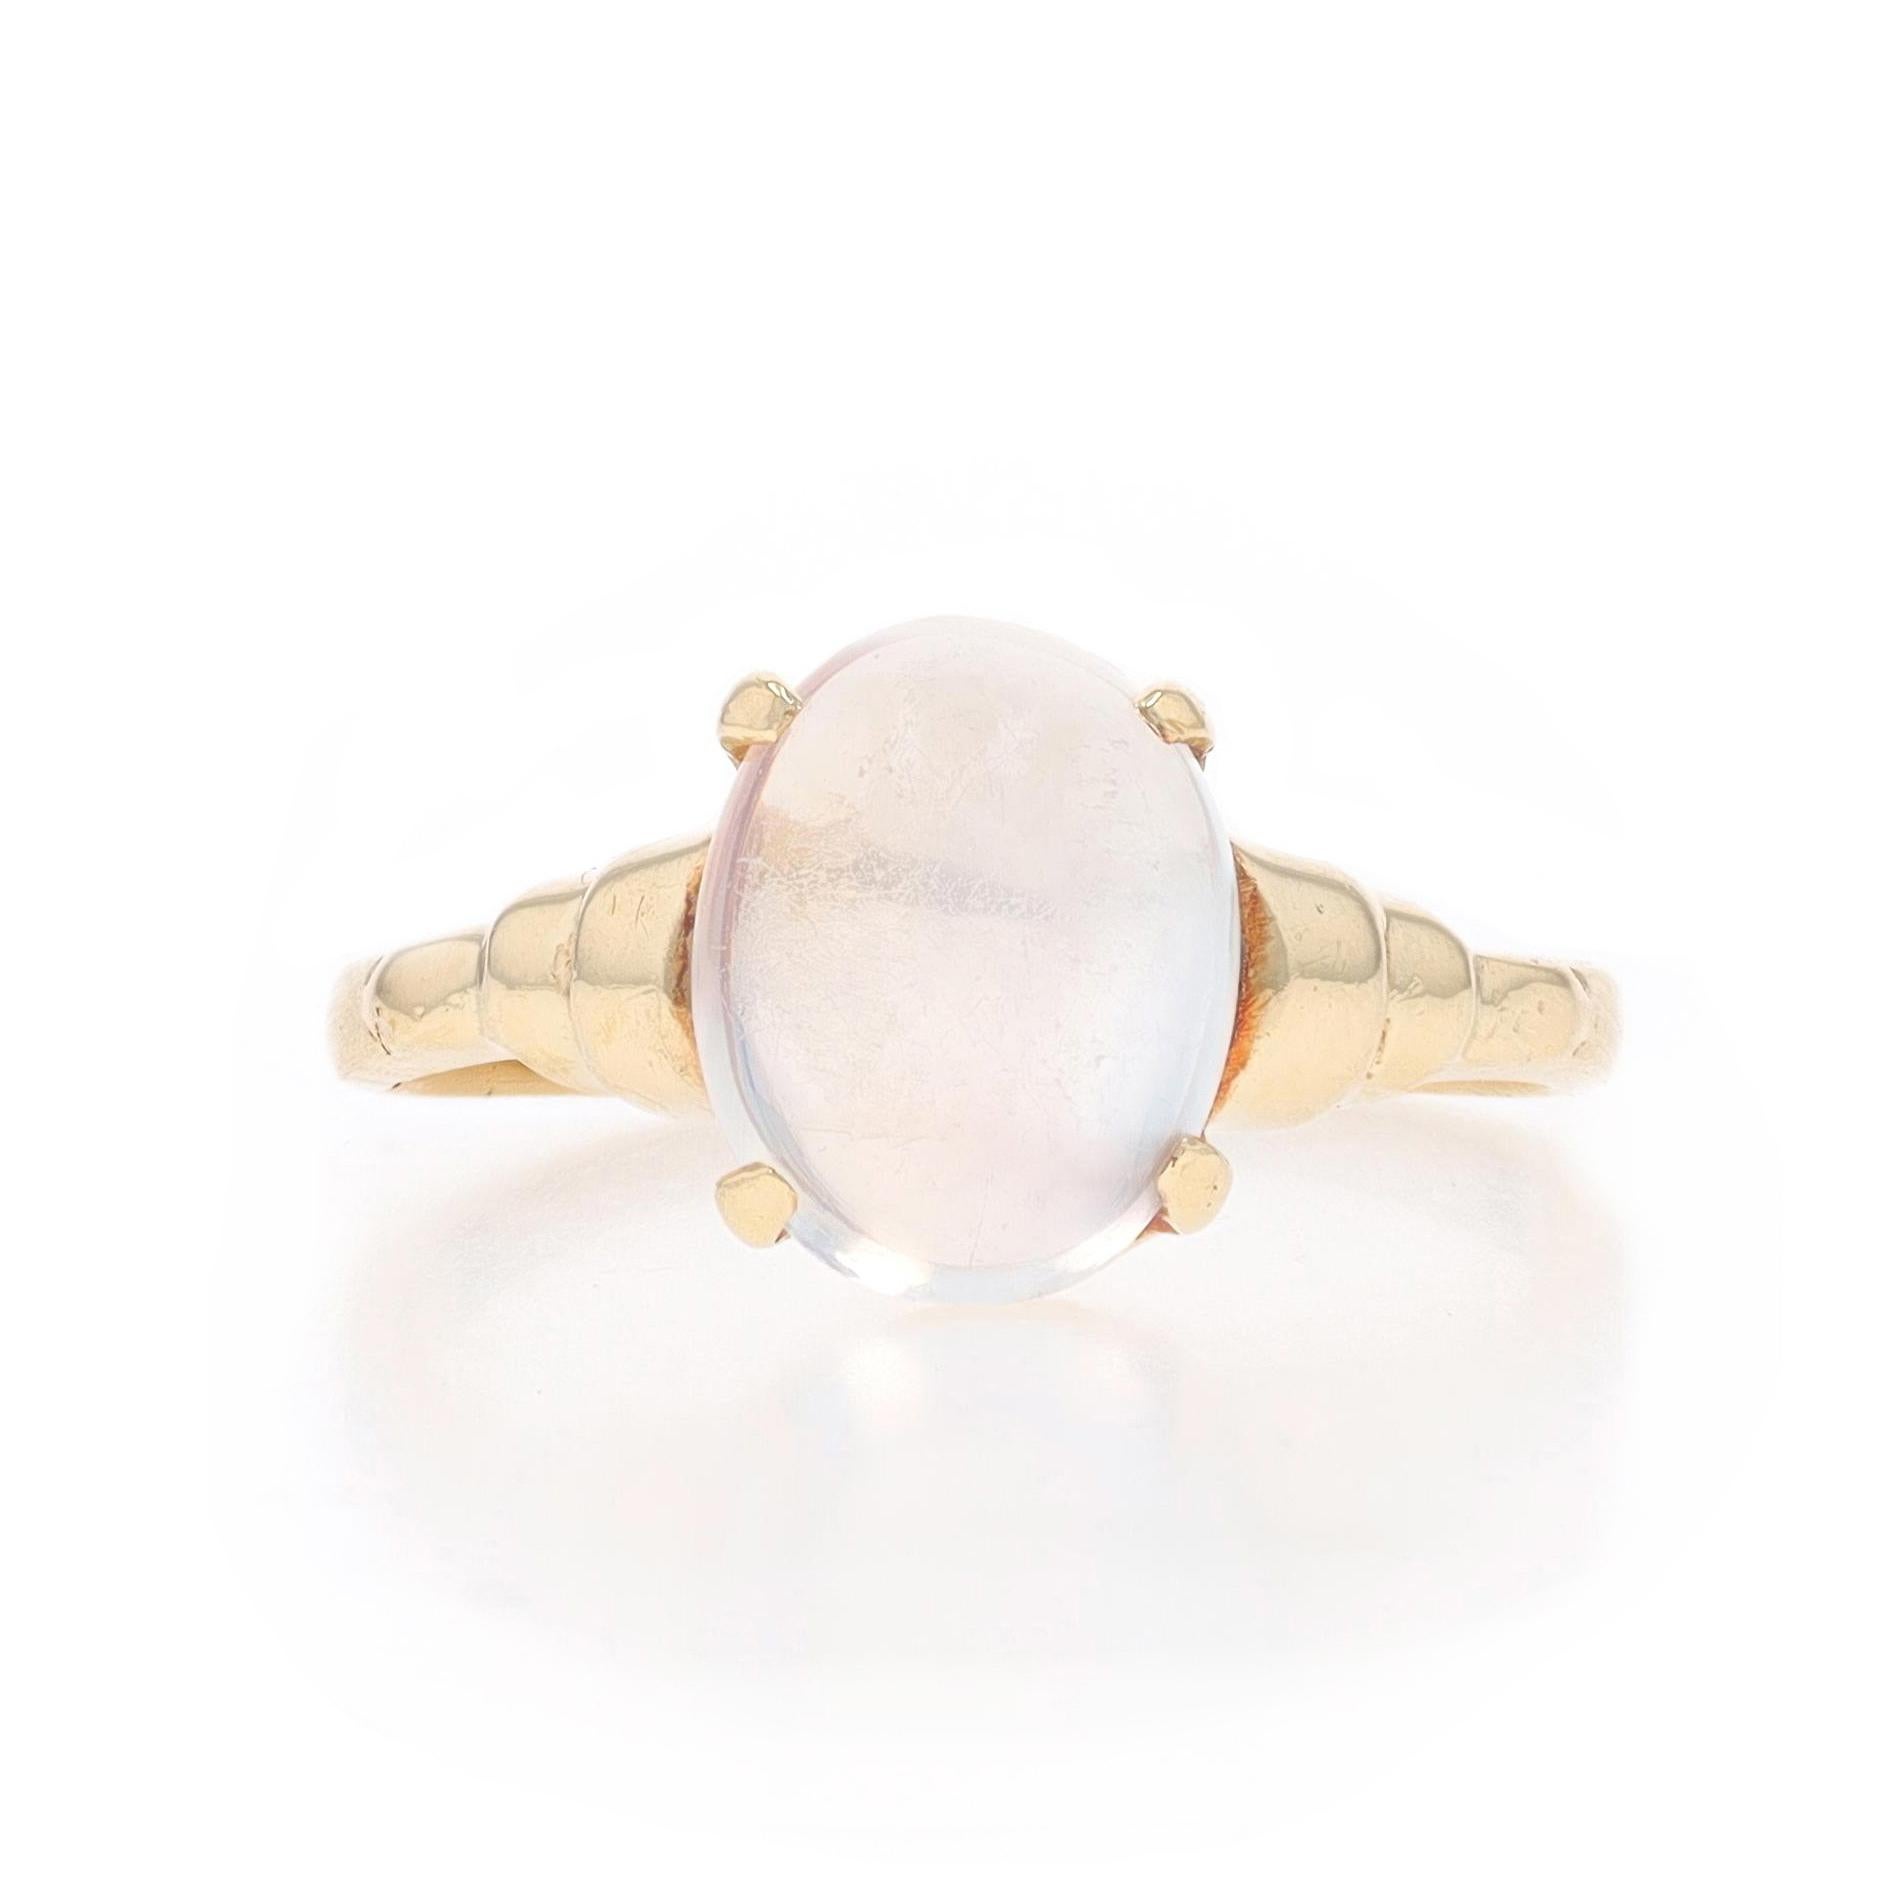 Size: 4 1/2
Sizing Fee: Up 3 sizes for $35 or Down 1 1/2 sizes for $35

Era: Vintage

Metal Content: 14k Yellow Gold

Stone Information

Natural Moonstone
Carat(s): 1.95ct
Cut: Oval Cabochon

Total Carats: 1.95ct

Style: